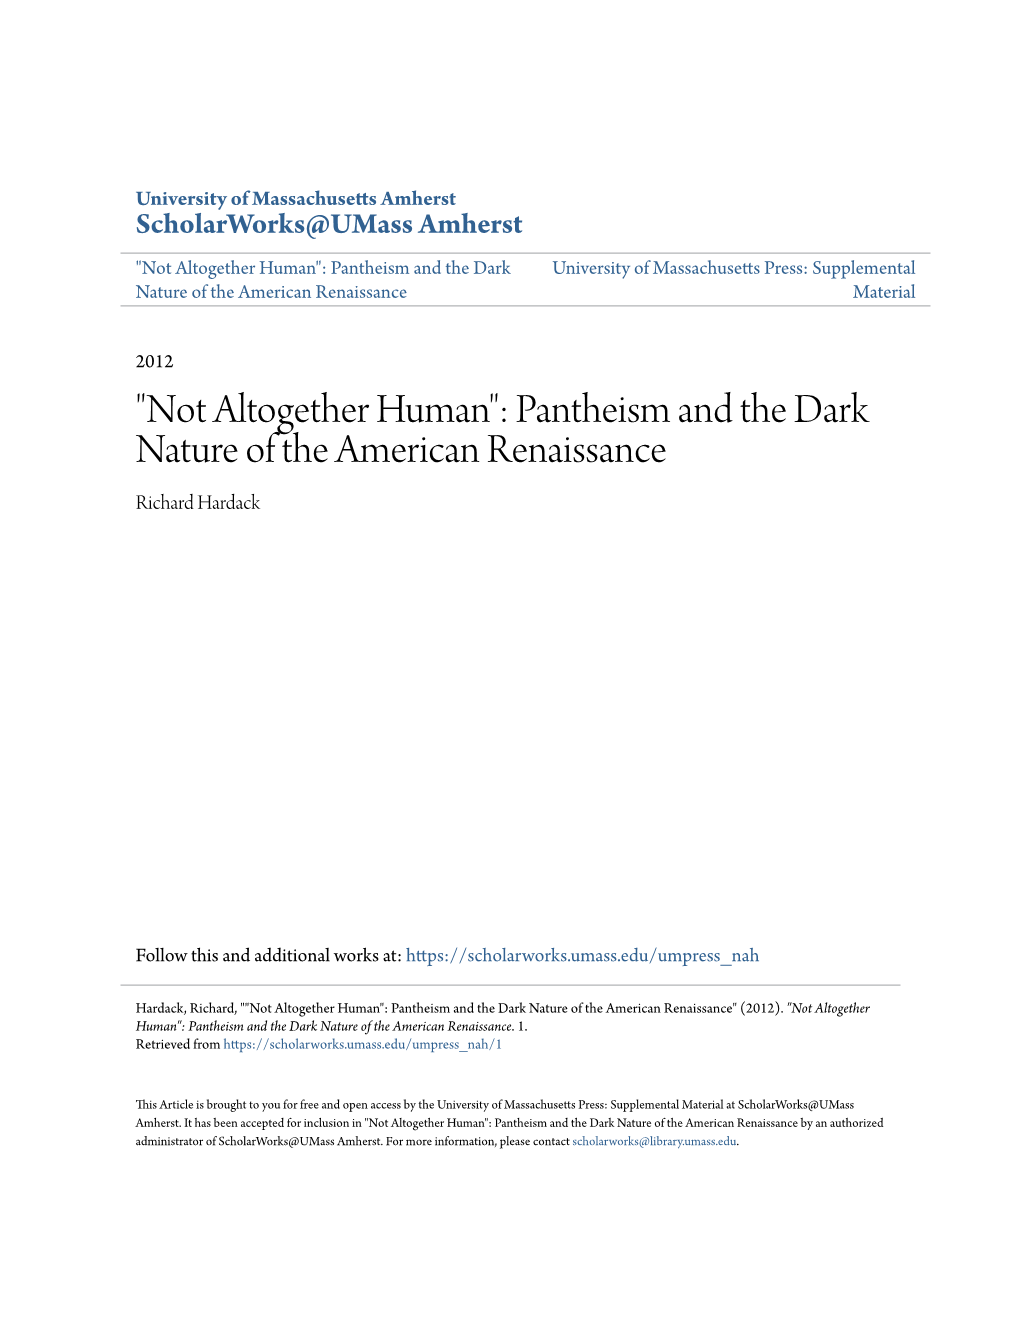 Pantheism and the Dark Nature of the American Renaissance Richard Hardack